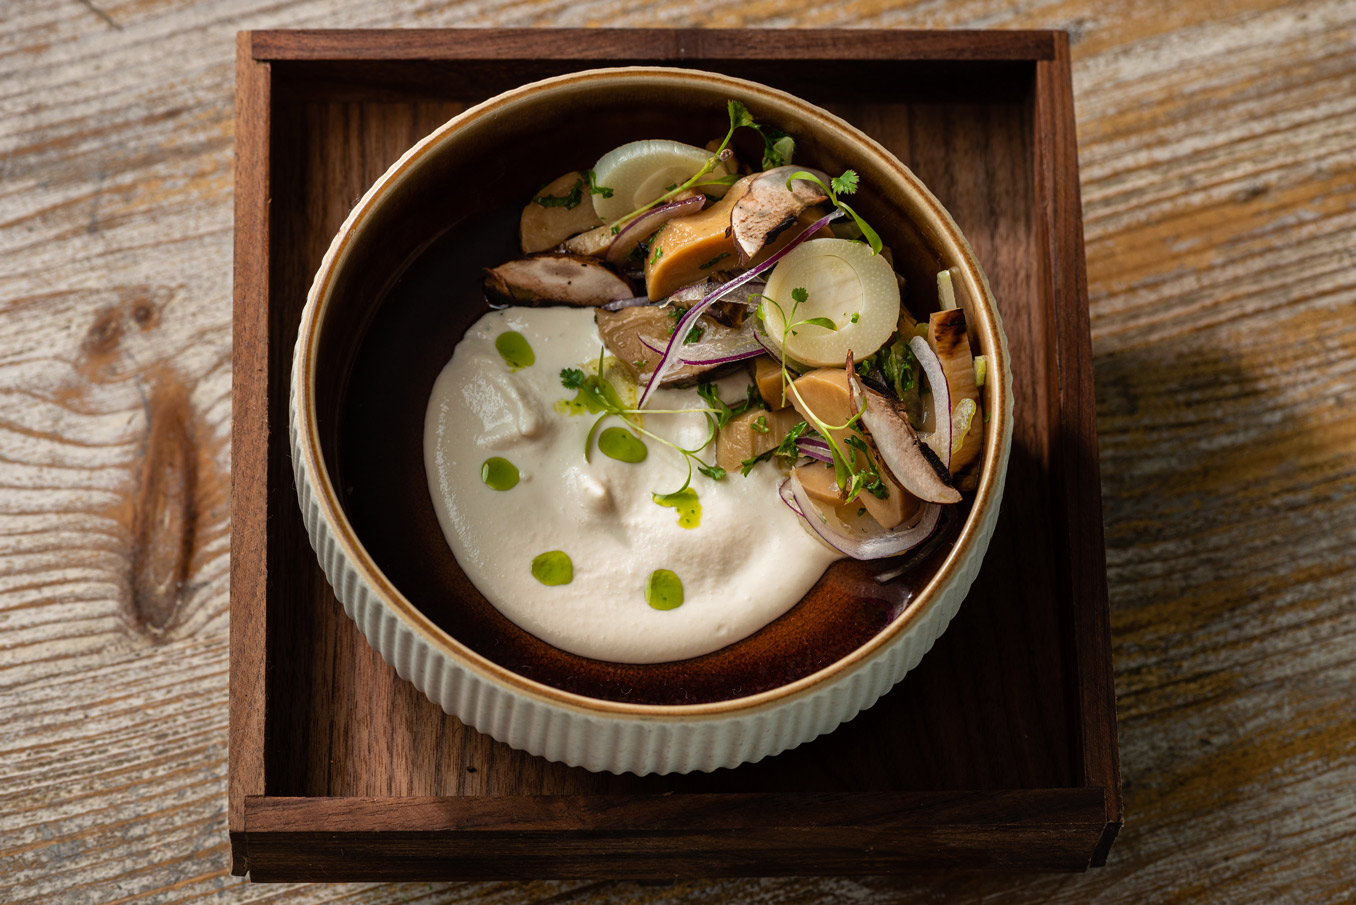 Mushroom ceviche at Ocean Social by Tristan Epps